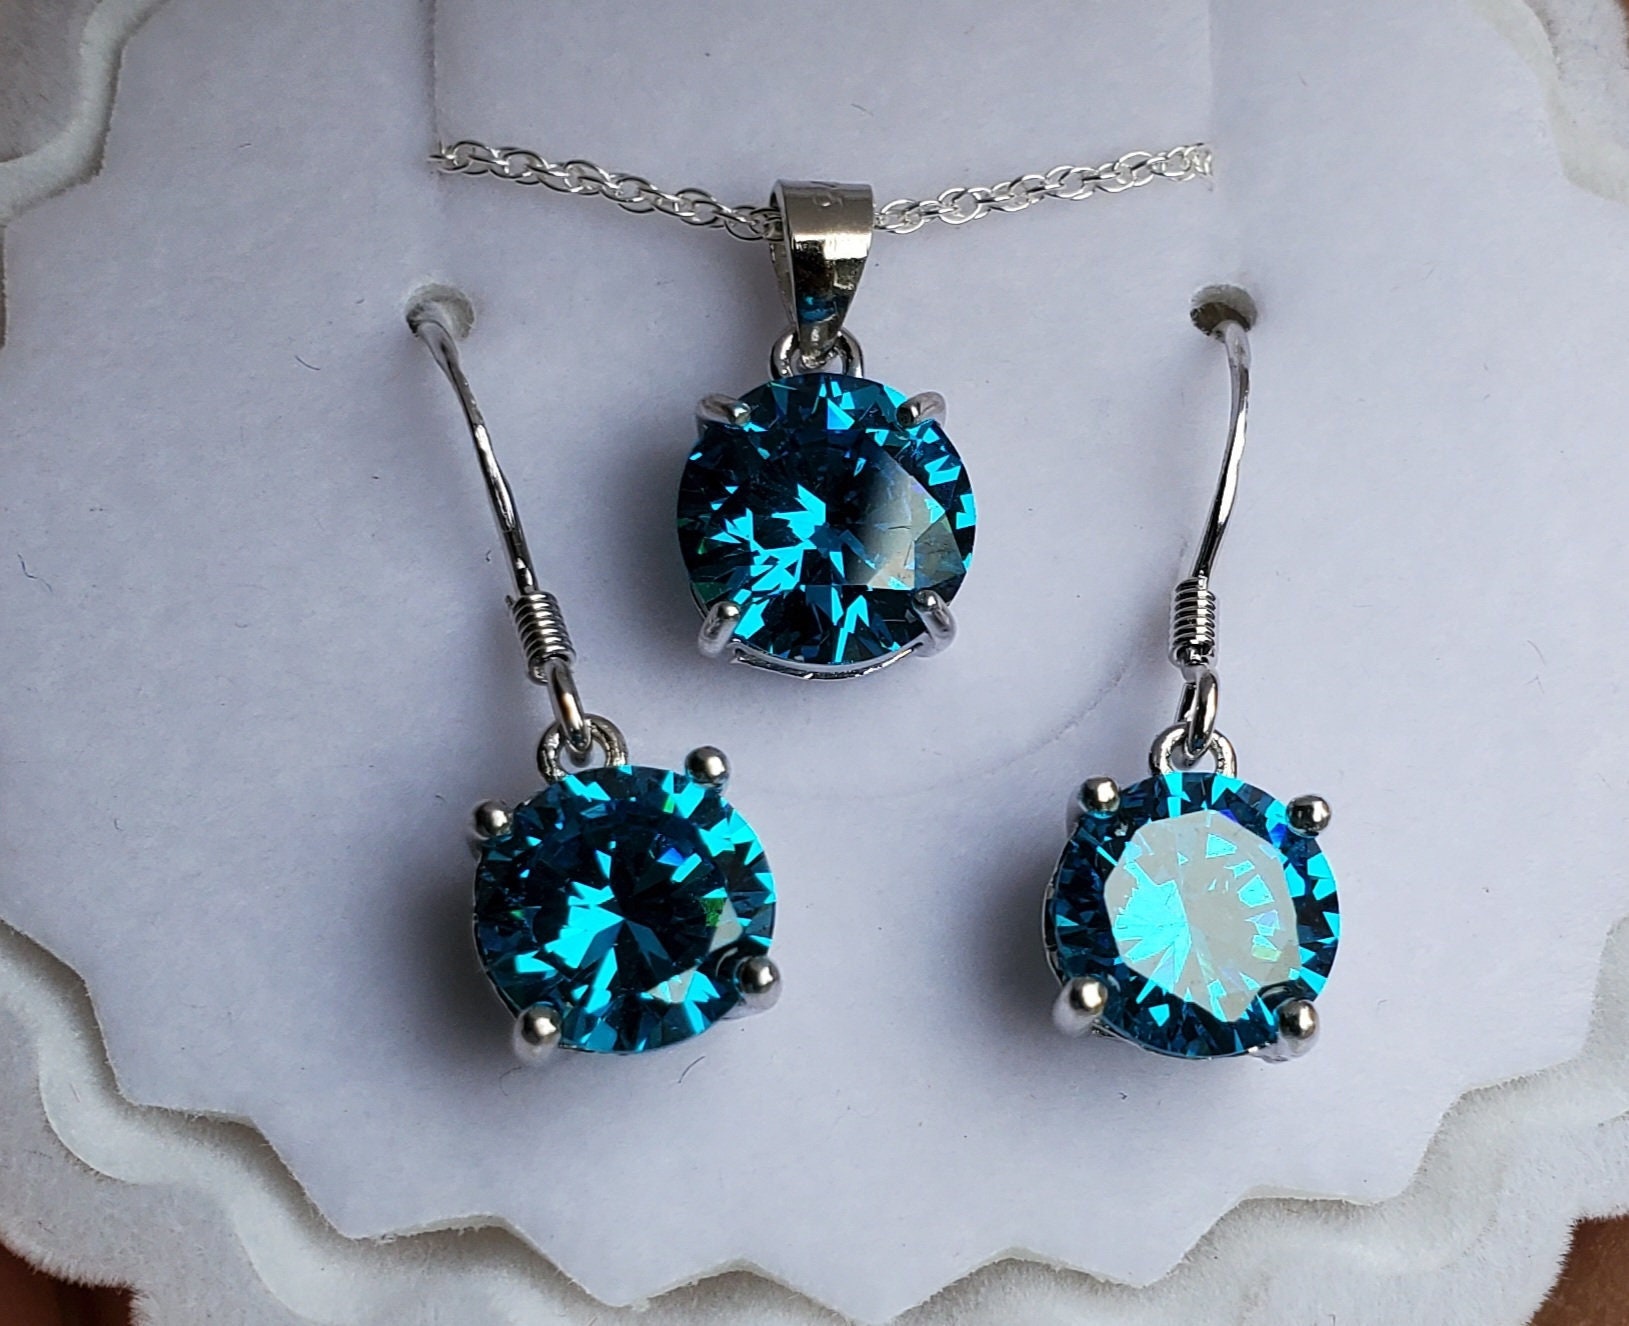 Cloudrivercreations Electric Blue Necklace/Earring Set, Must See Color on Video! 8mm/7.5mm Cubic Zirconias, 925 Sterling Silver Settings,Ear Wires, Shell Box